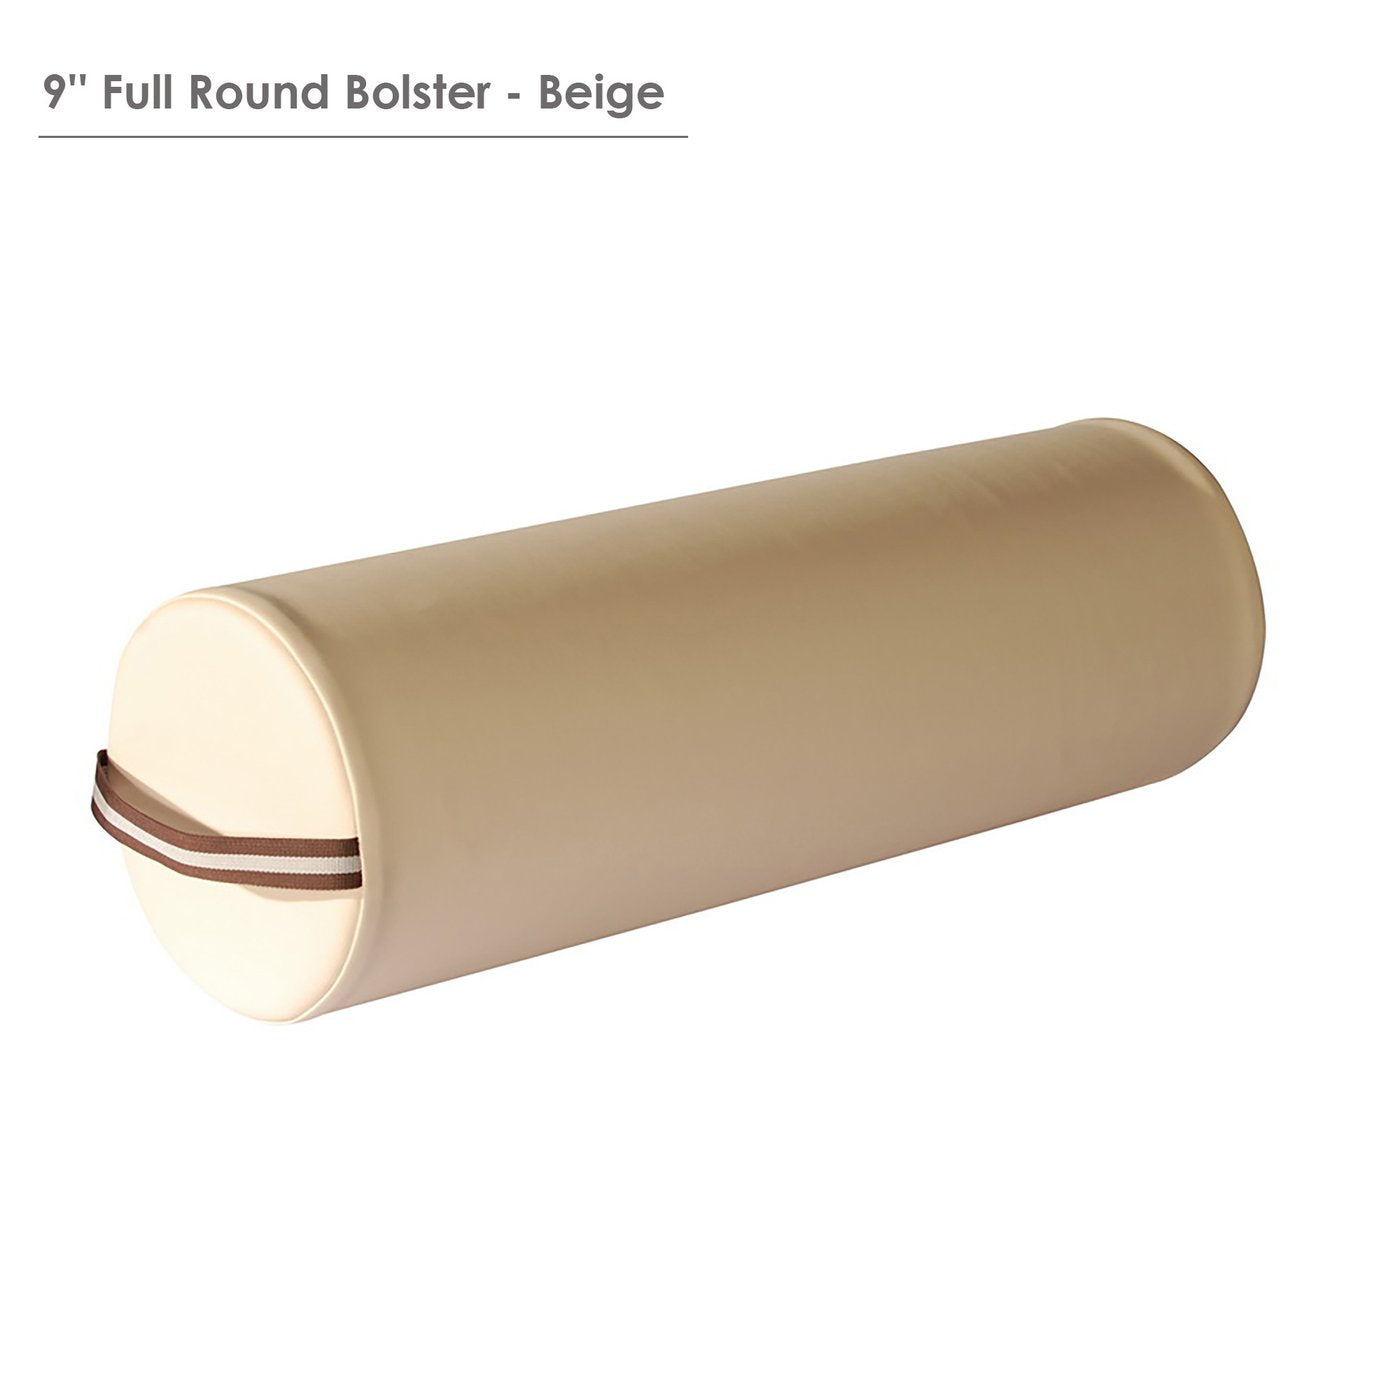 Extra Large 9"x26" Full Round Bolster for Massage Table